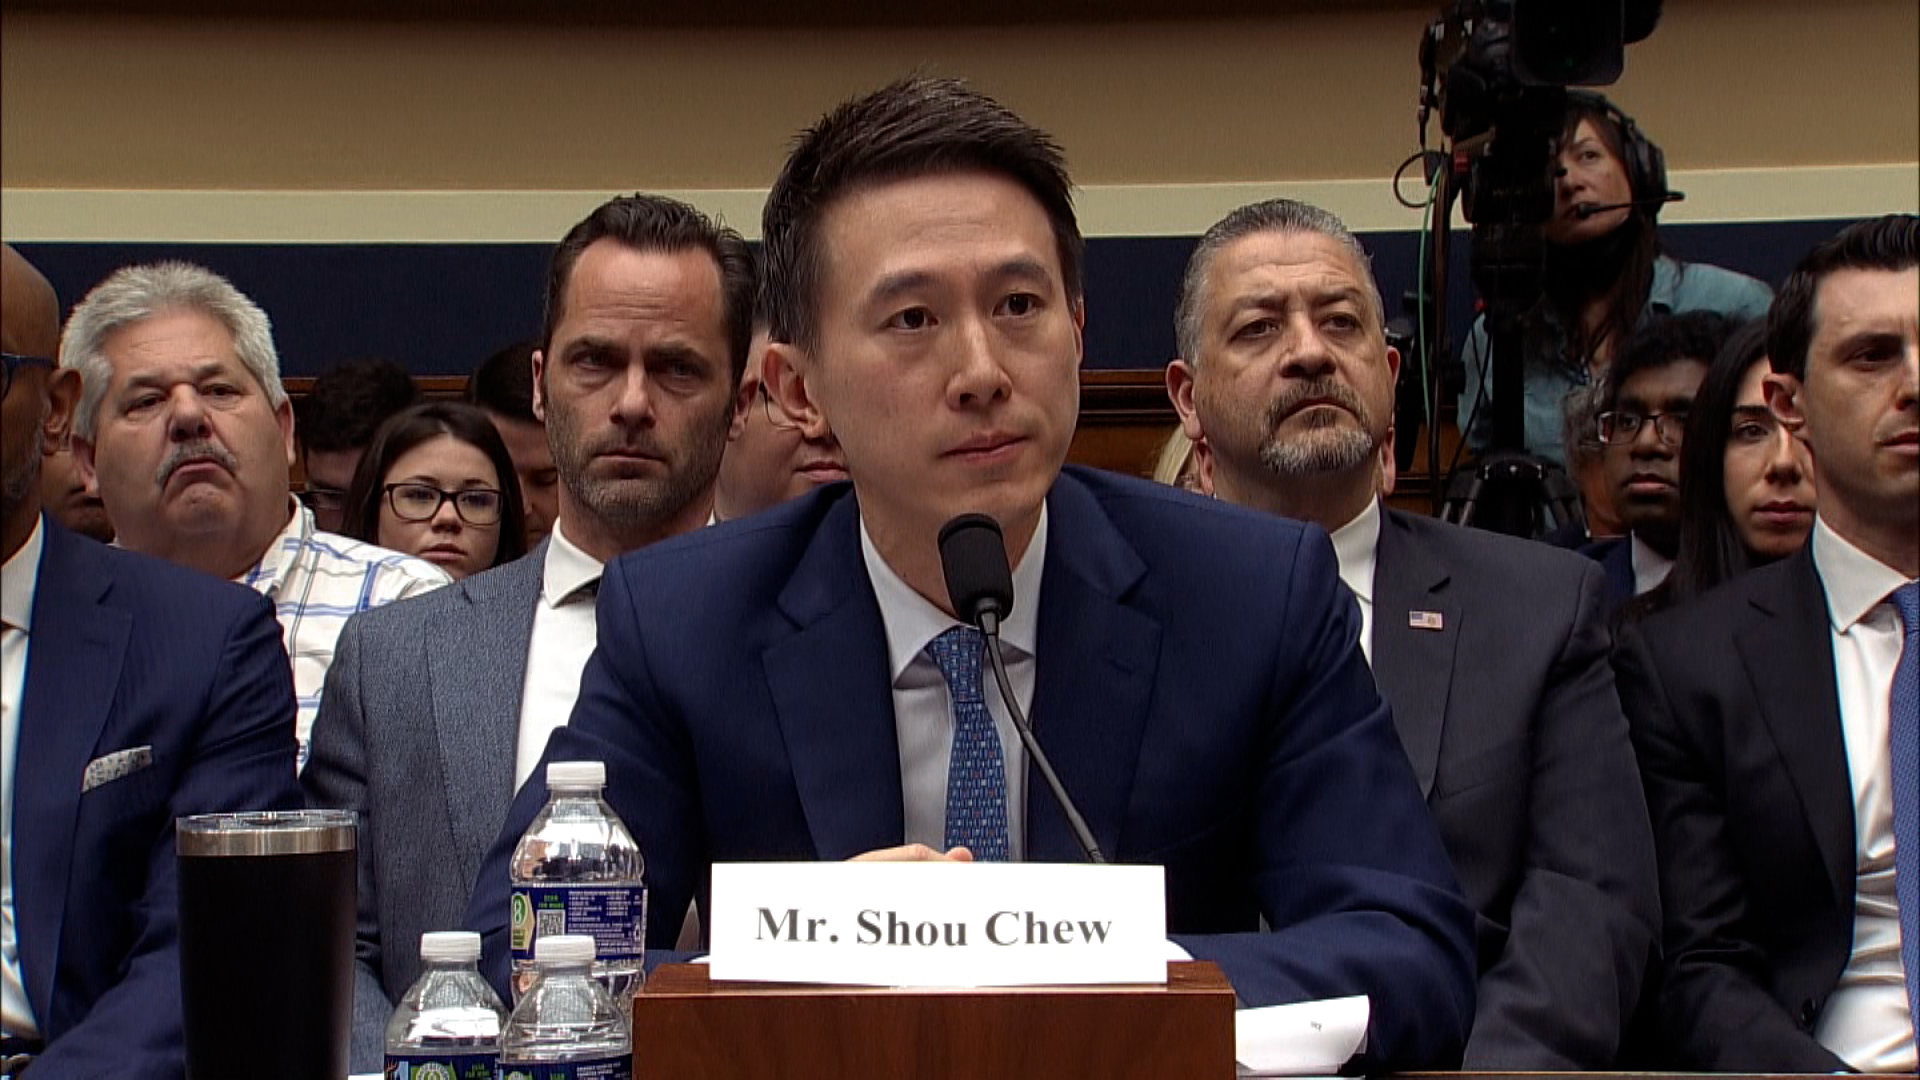 In his first appearance before Congress on Thursday, TikTok CEO Shou Chew was grilled by lawmakers ...